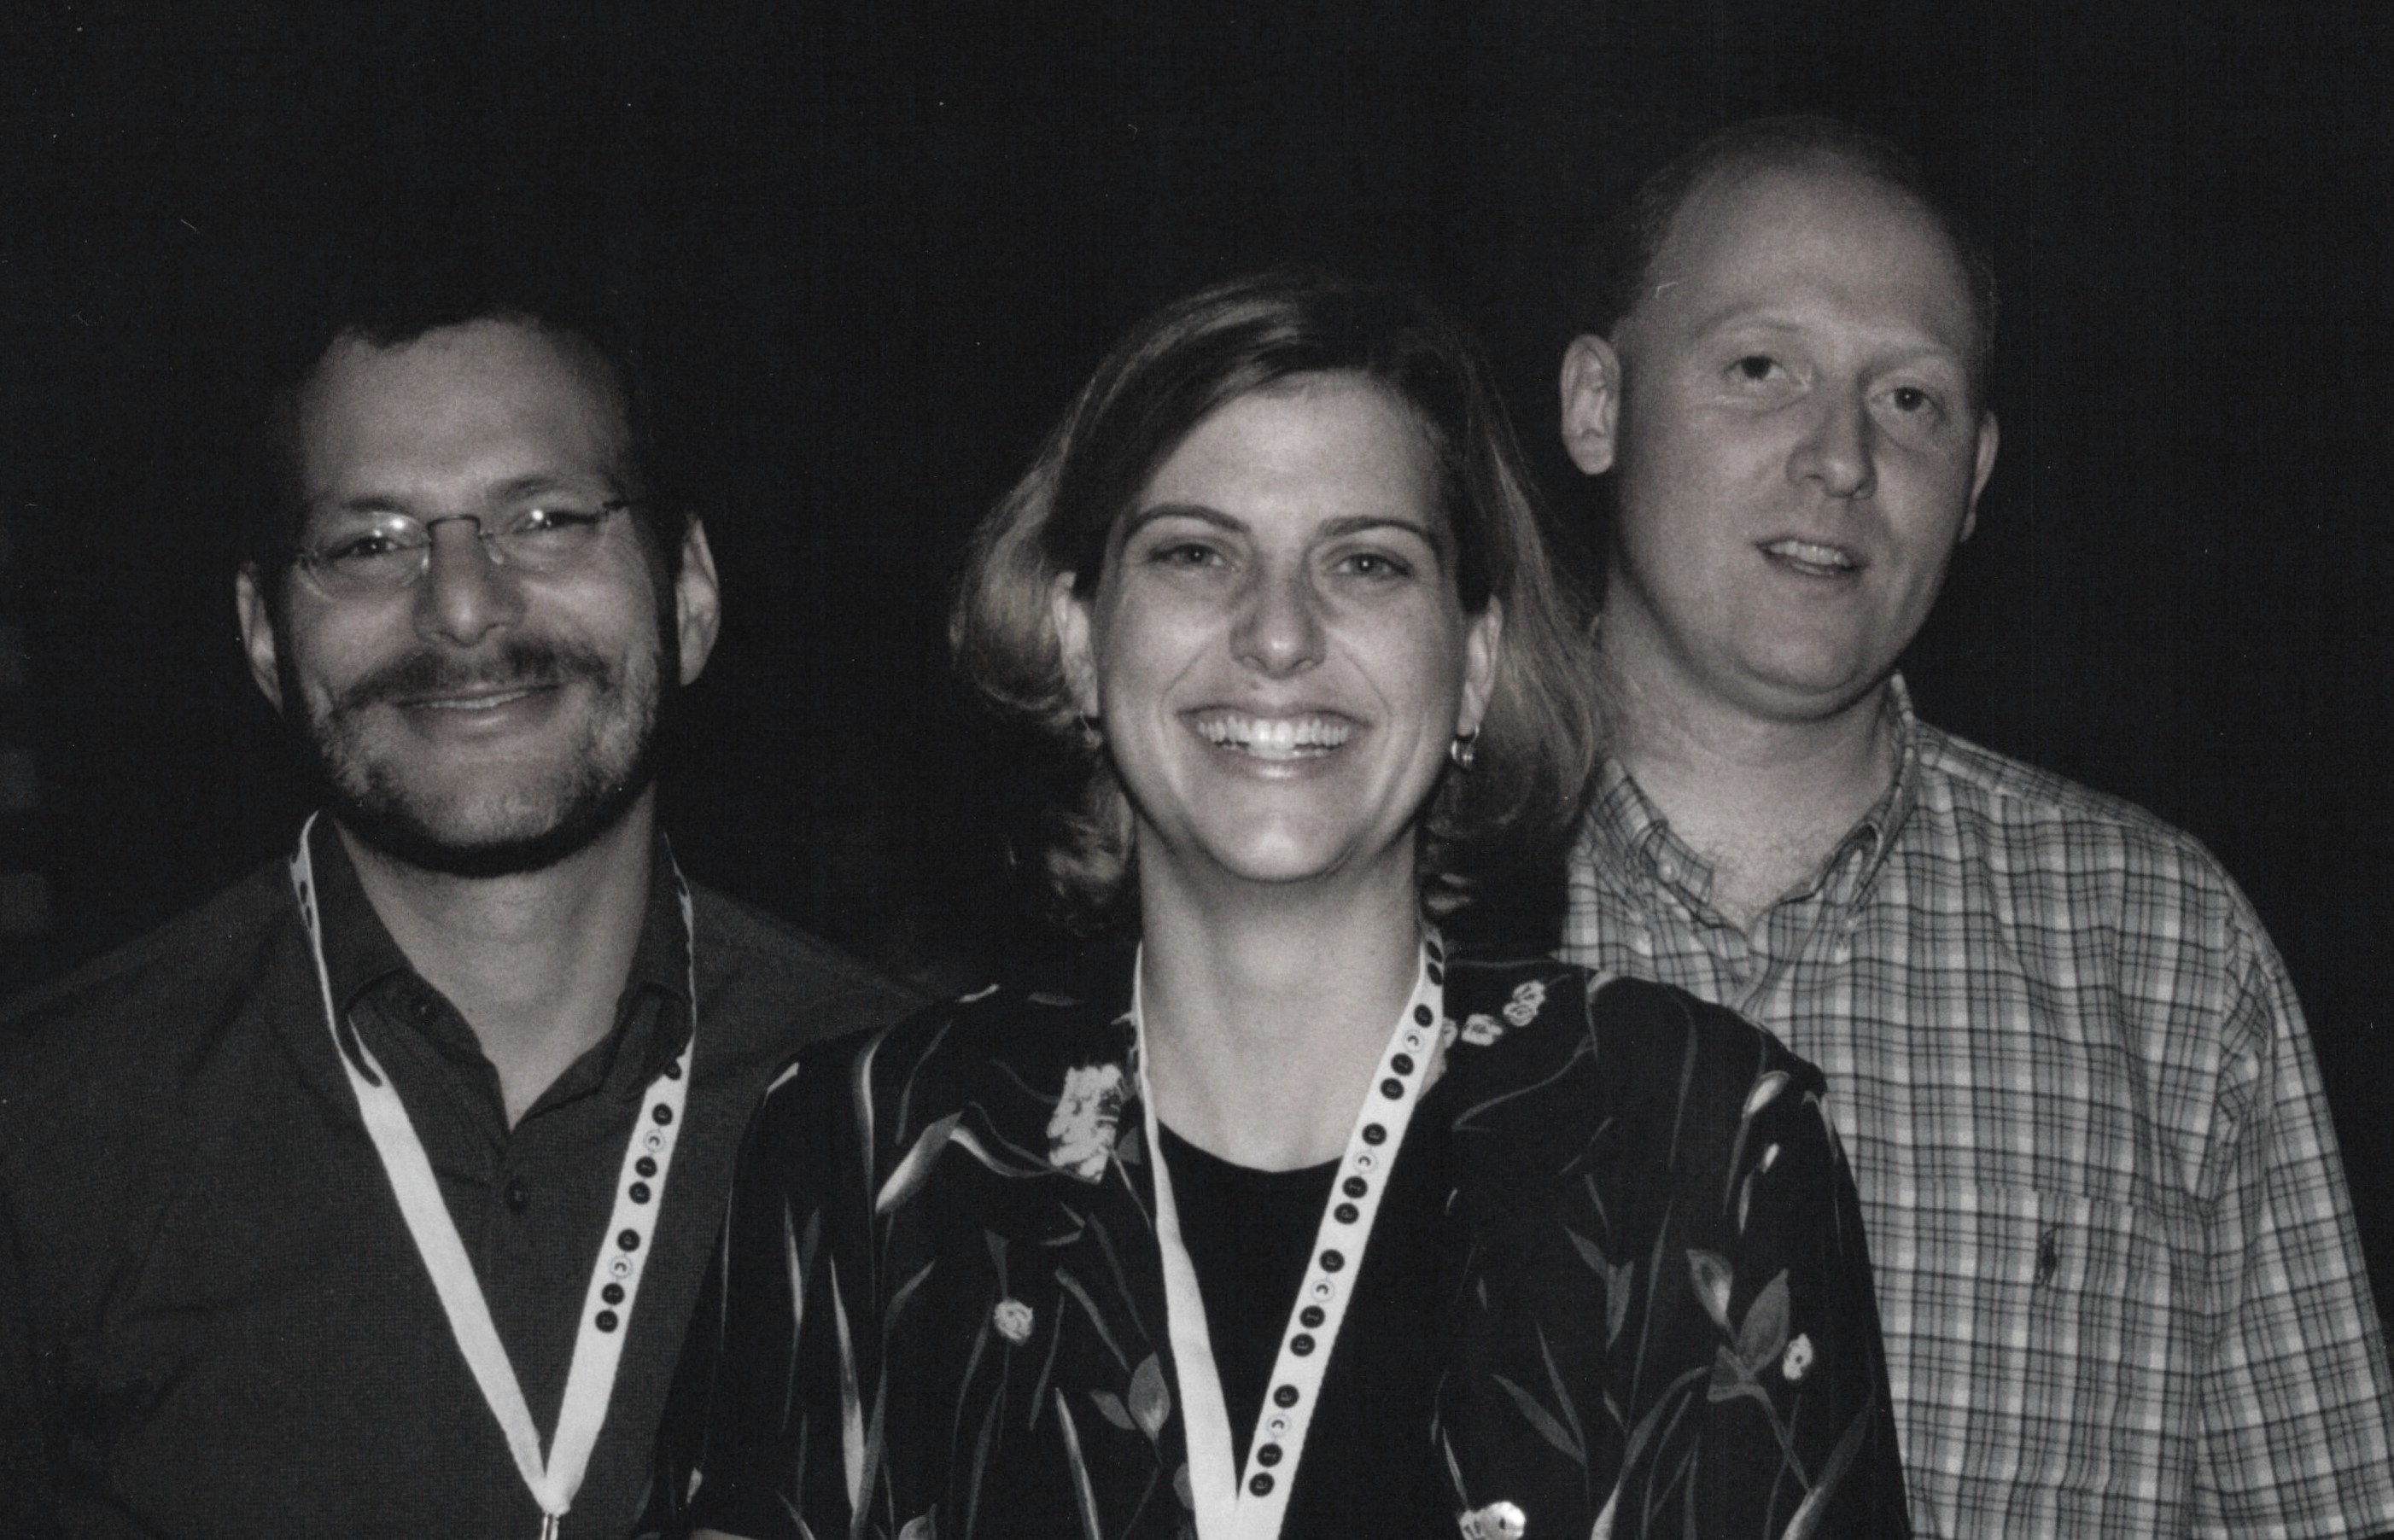 Lou Rosenfeld (left) and Peter Morville (right) in 2000, with Samantha Bailey, then Vice President of Consulting Operations at Argus Associates. Photo courtesy of P. Morville.